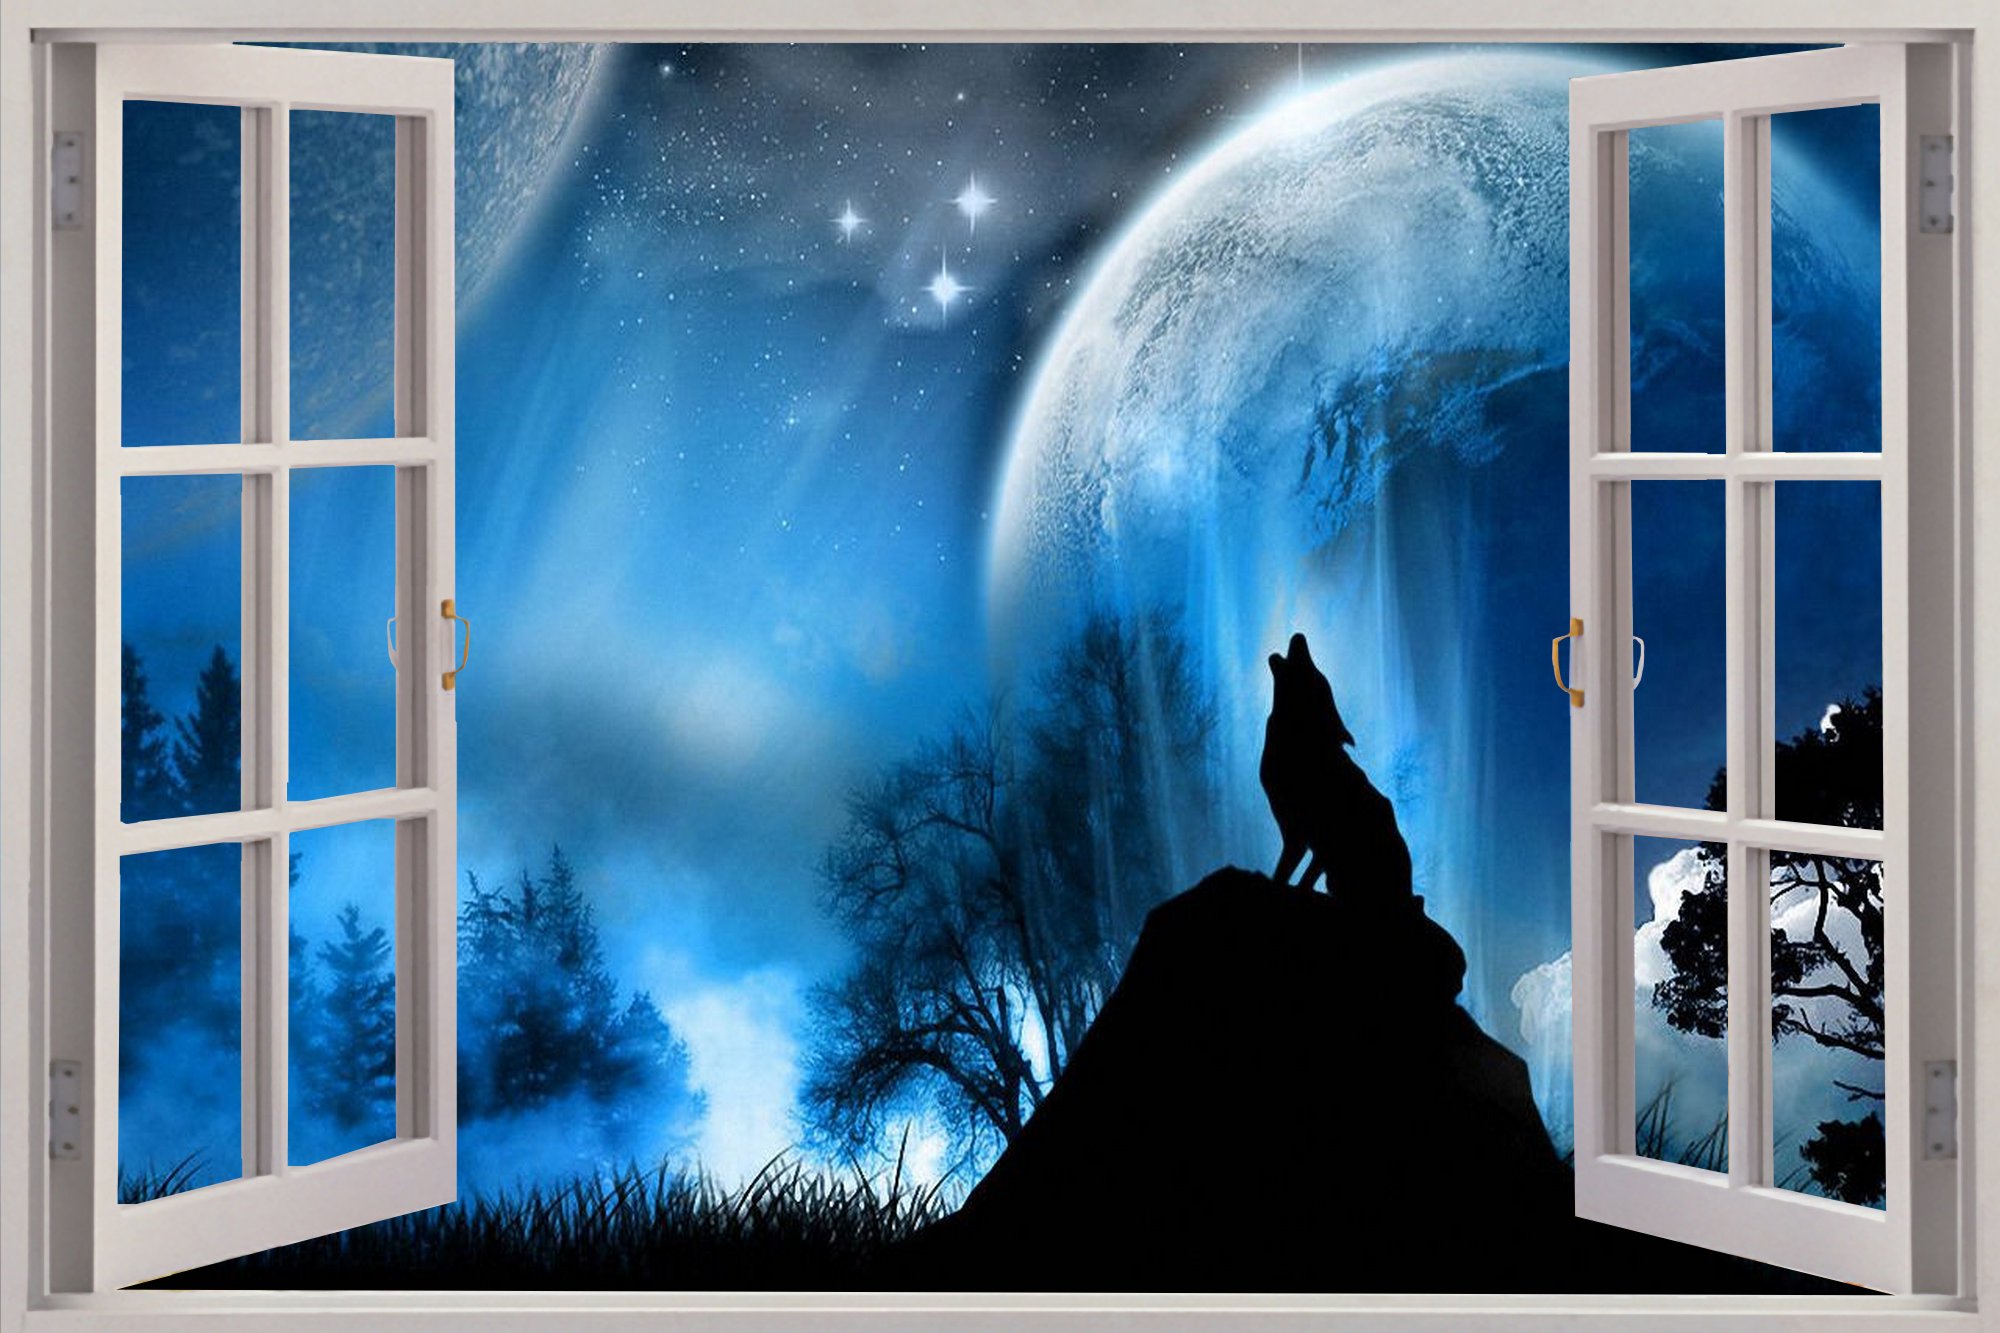  Window Lone Wolf at night View Wall Stickers Mural Art Decal Wallpaper